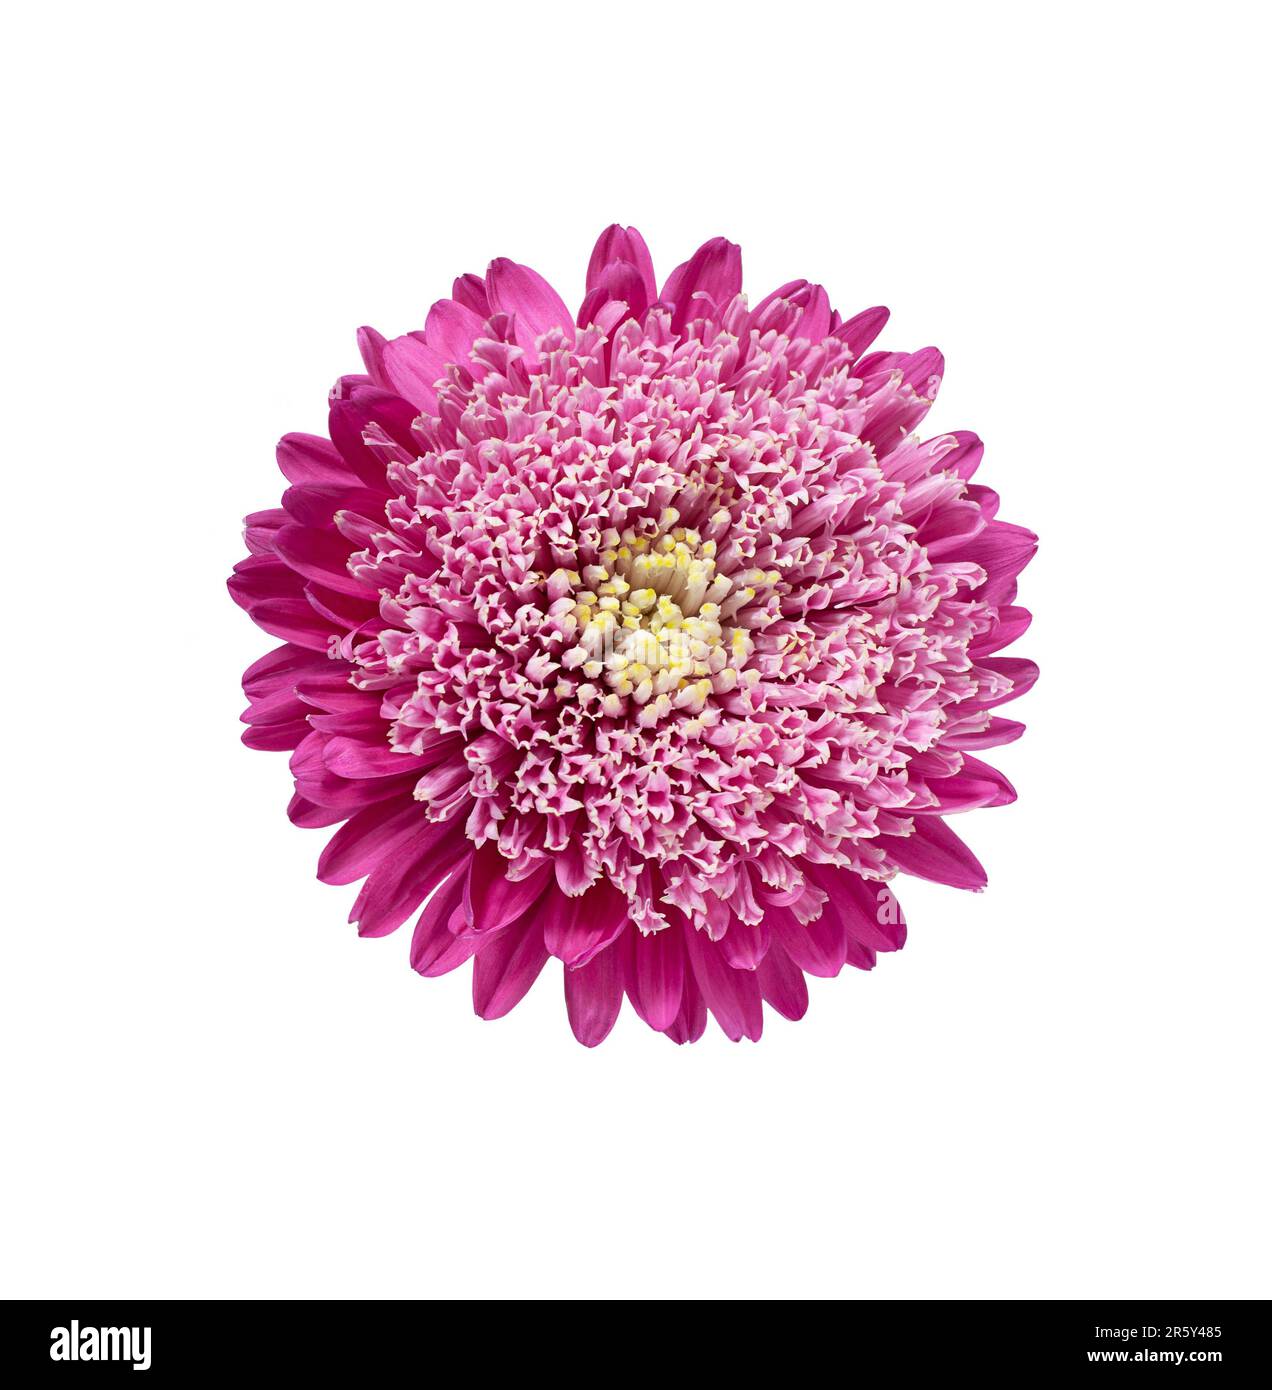 Light pink chrysanthemum, aster with yellow stamens on white isolated background. Close-up. big fluffy flower. Design element Stock Photo